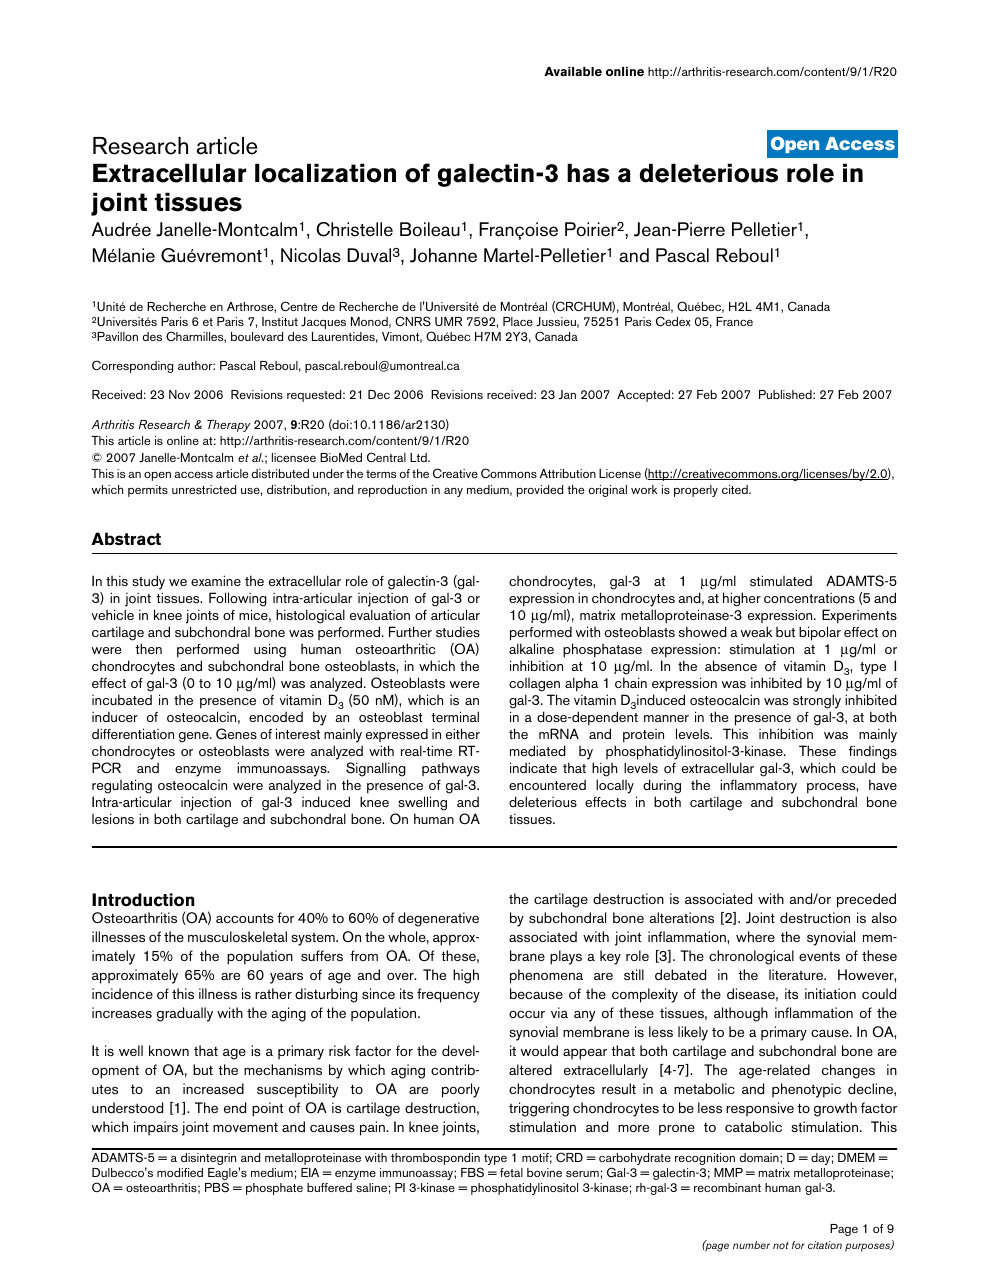 Extracellular Localization Of Galectin 3 Has A Deleterious Role In Joint Tissues Topic Of Research Paper In Biological Sciences Download Scholarly Article Pdf And Read For Free On Cyberleninka Open Science Hub